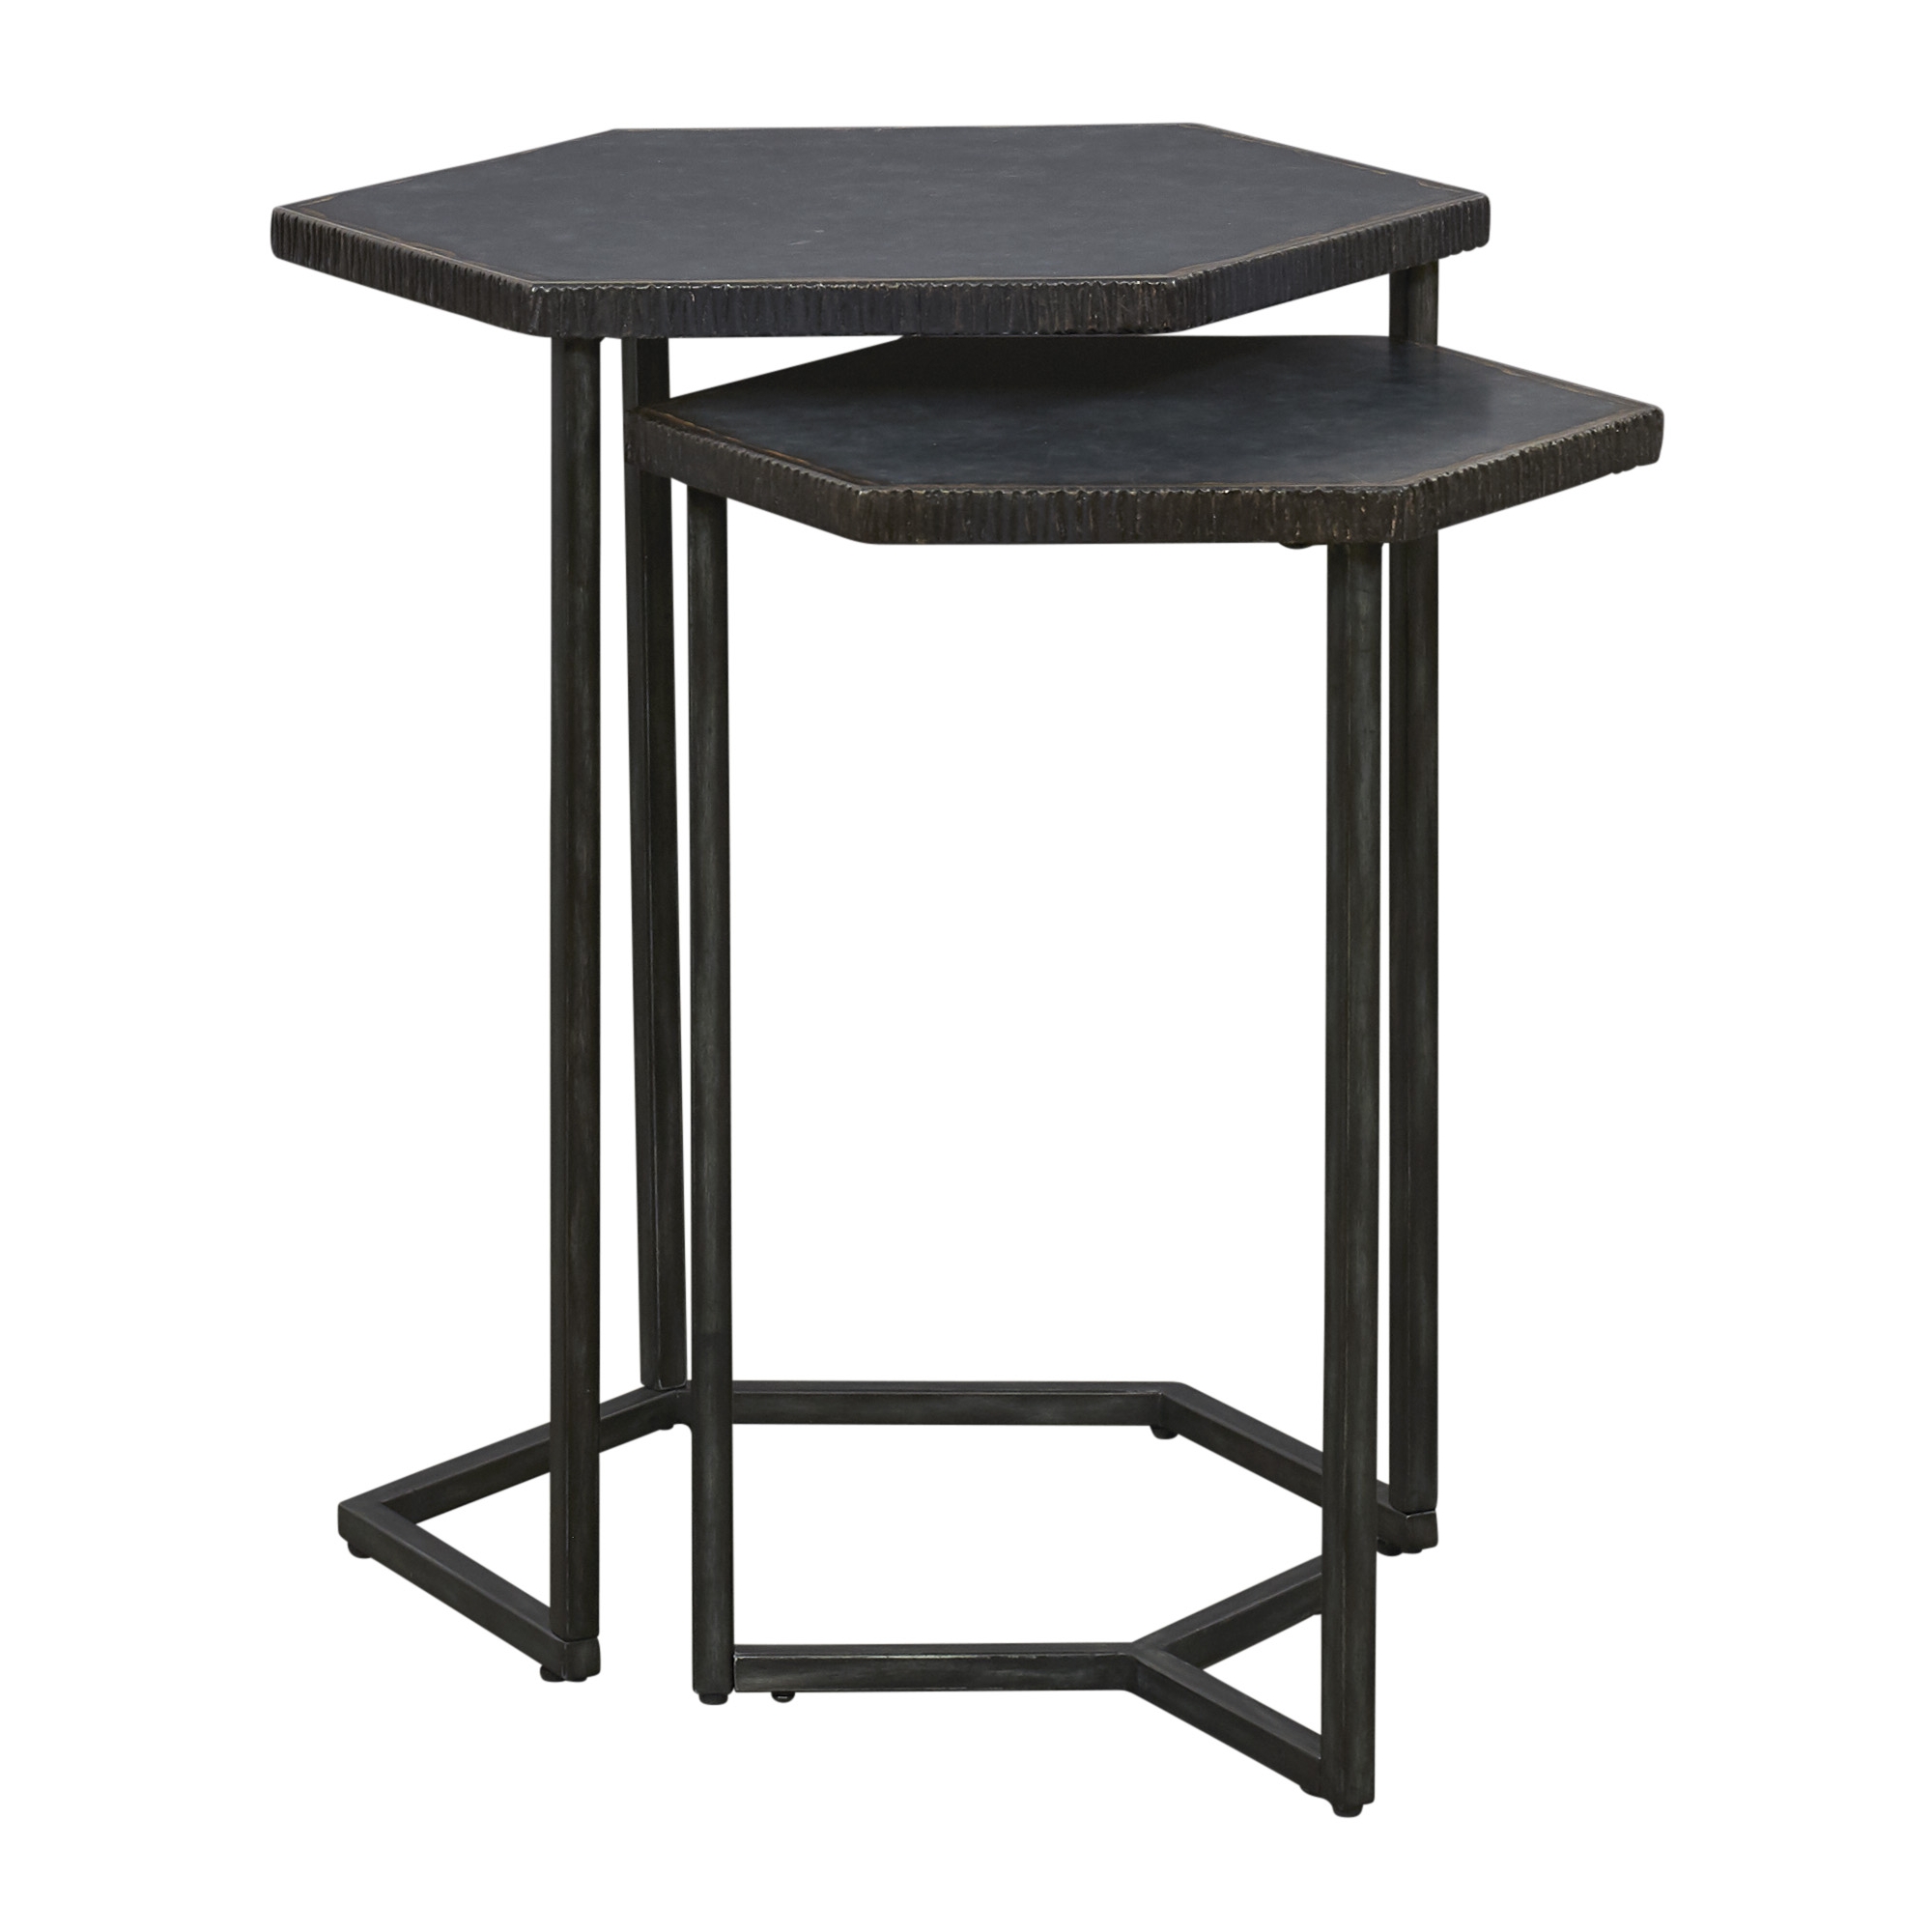 Nesting Tables Ziyan Nesting Tables - Find the Perfect Style! | Havertys